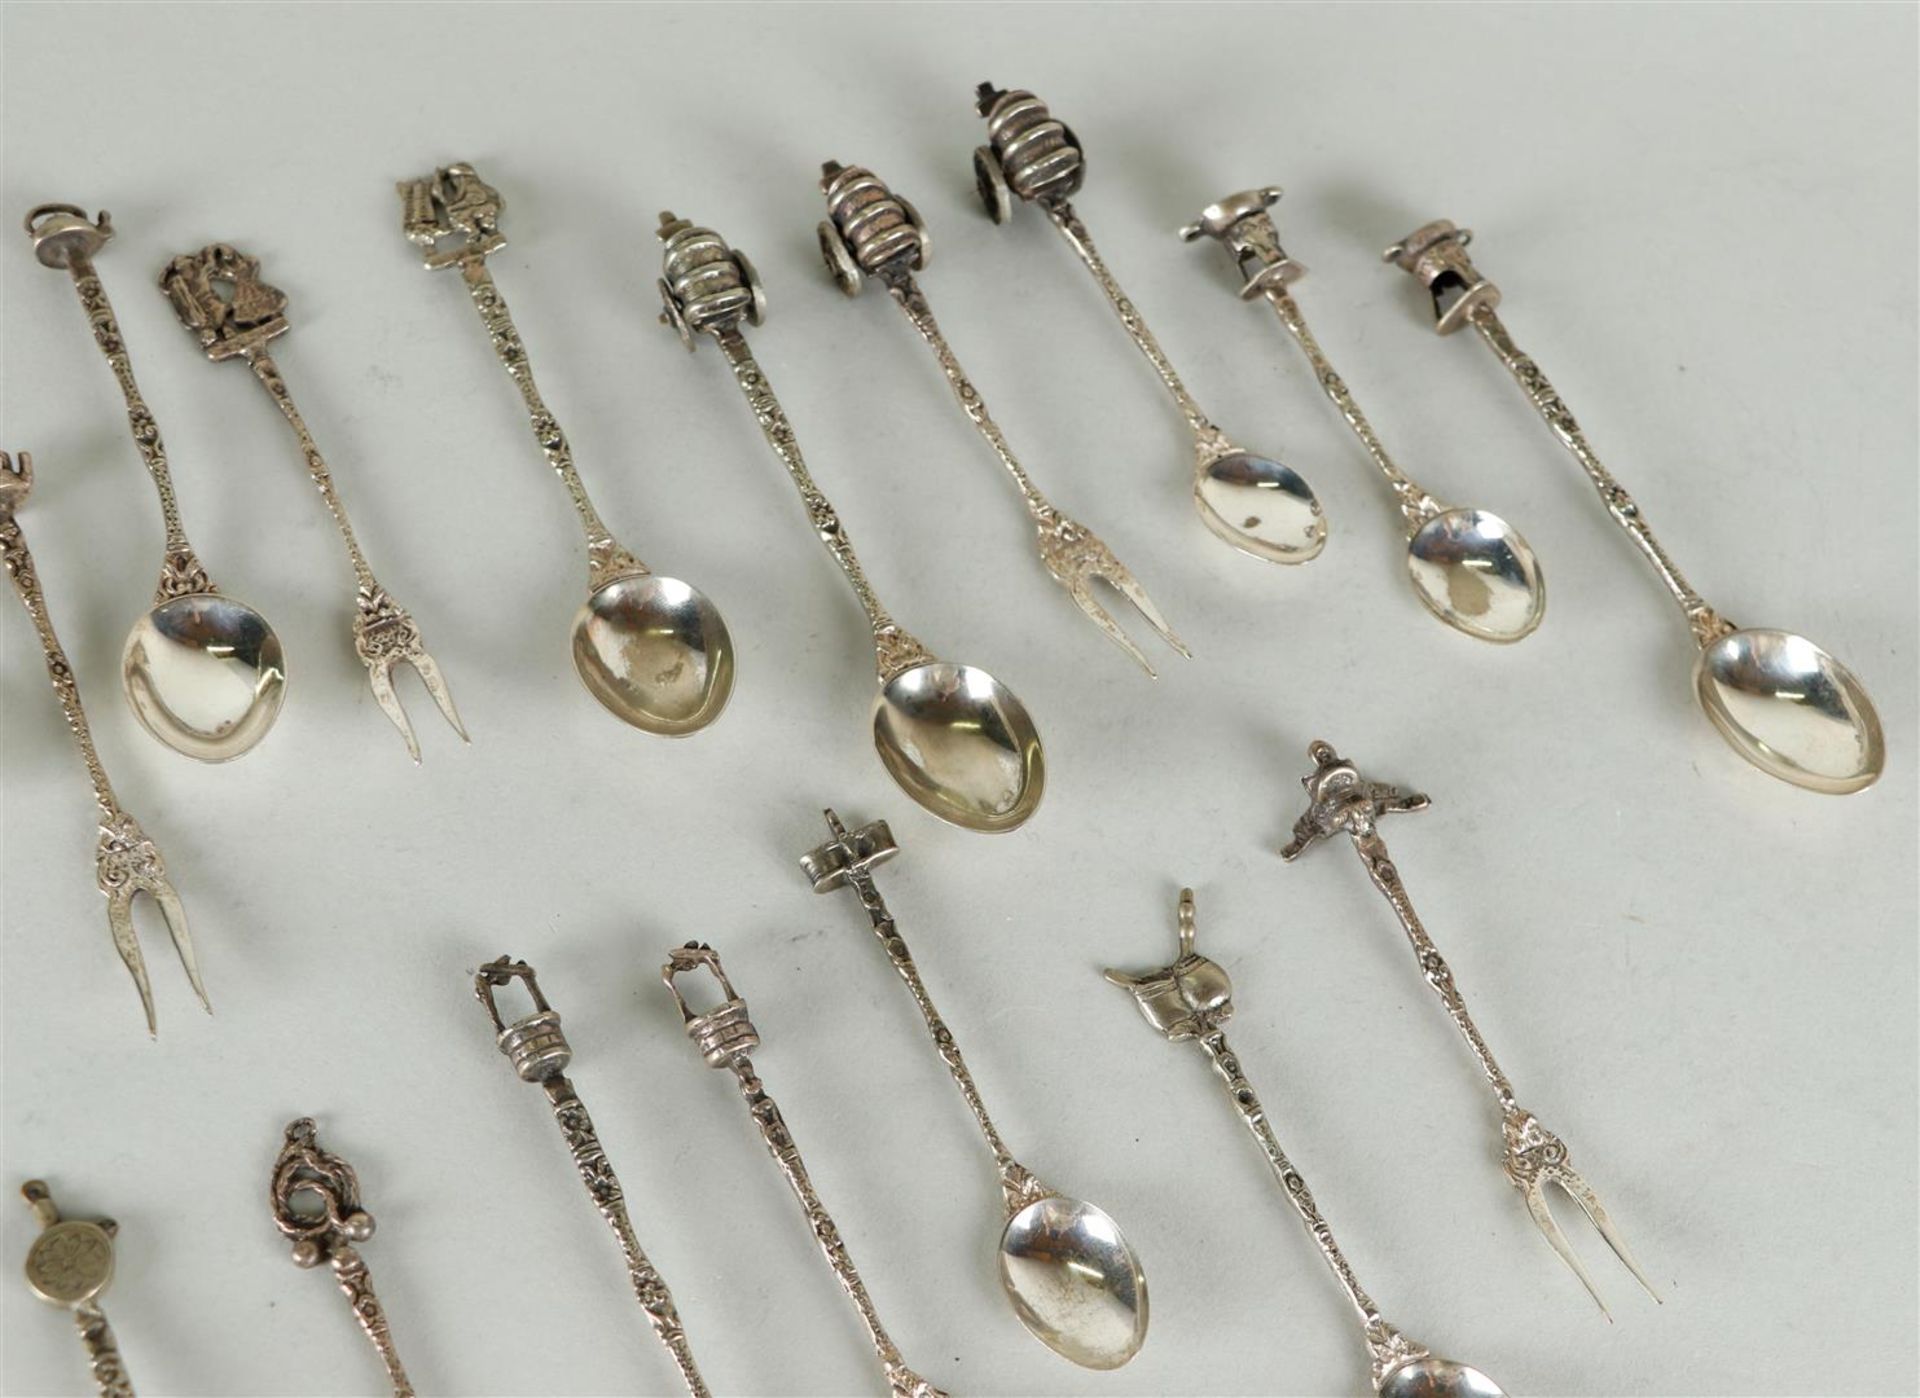 A large lot of (20) silver forks and spoons with wells, covered wagons, teapots etc.